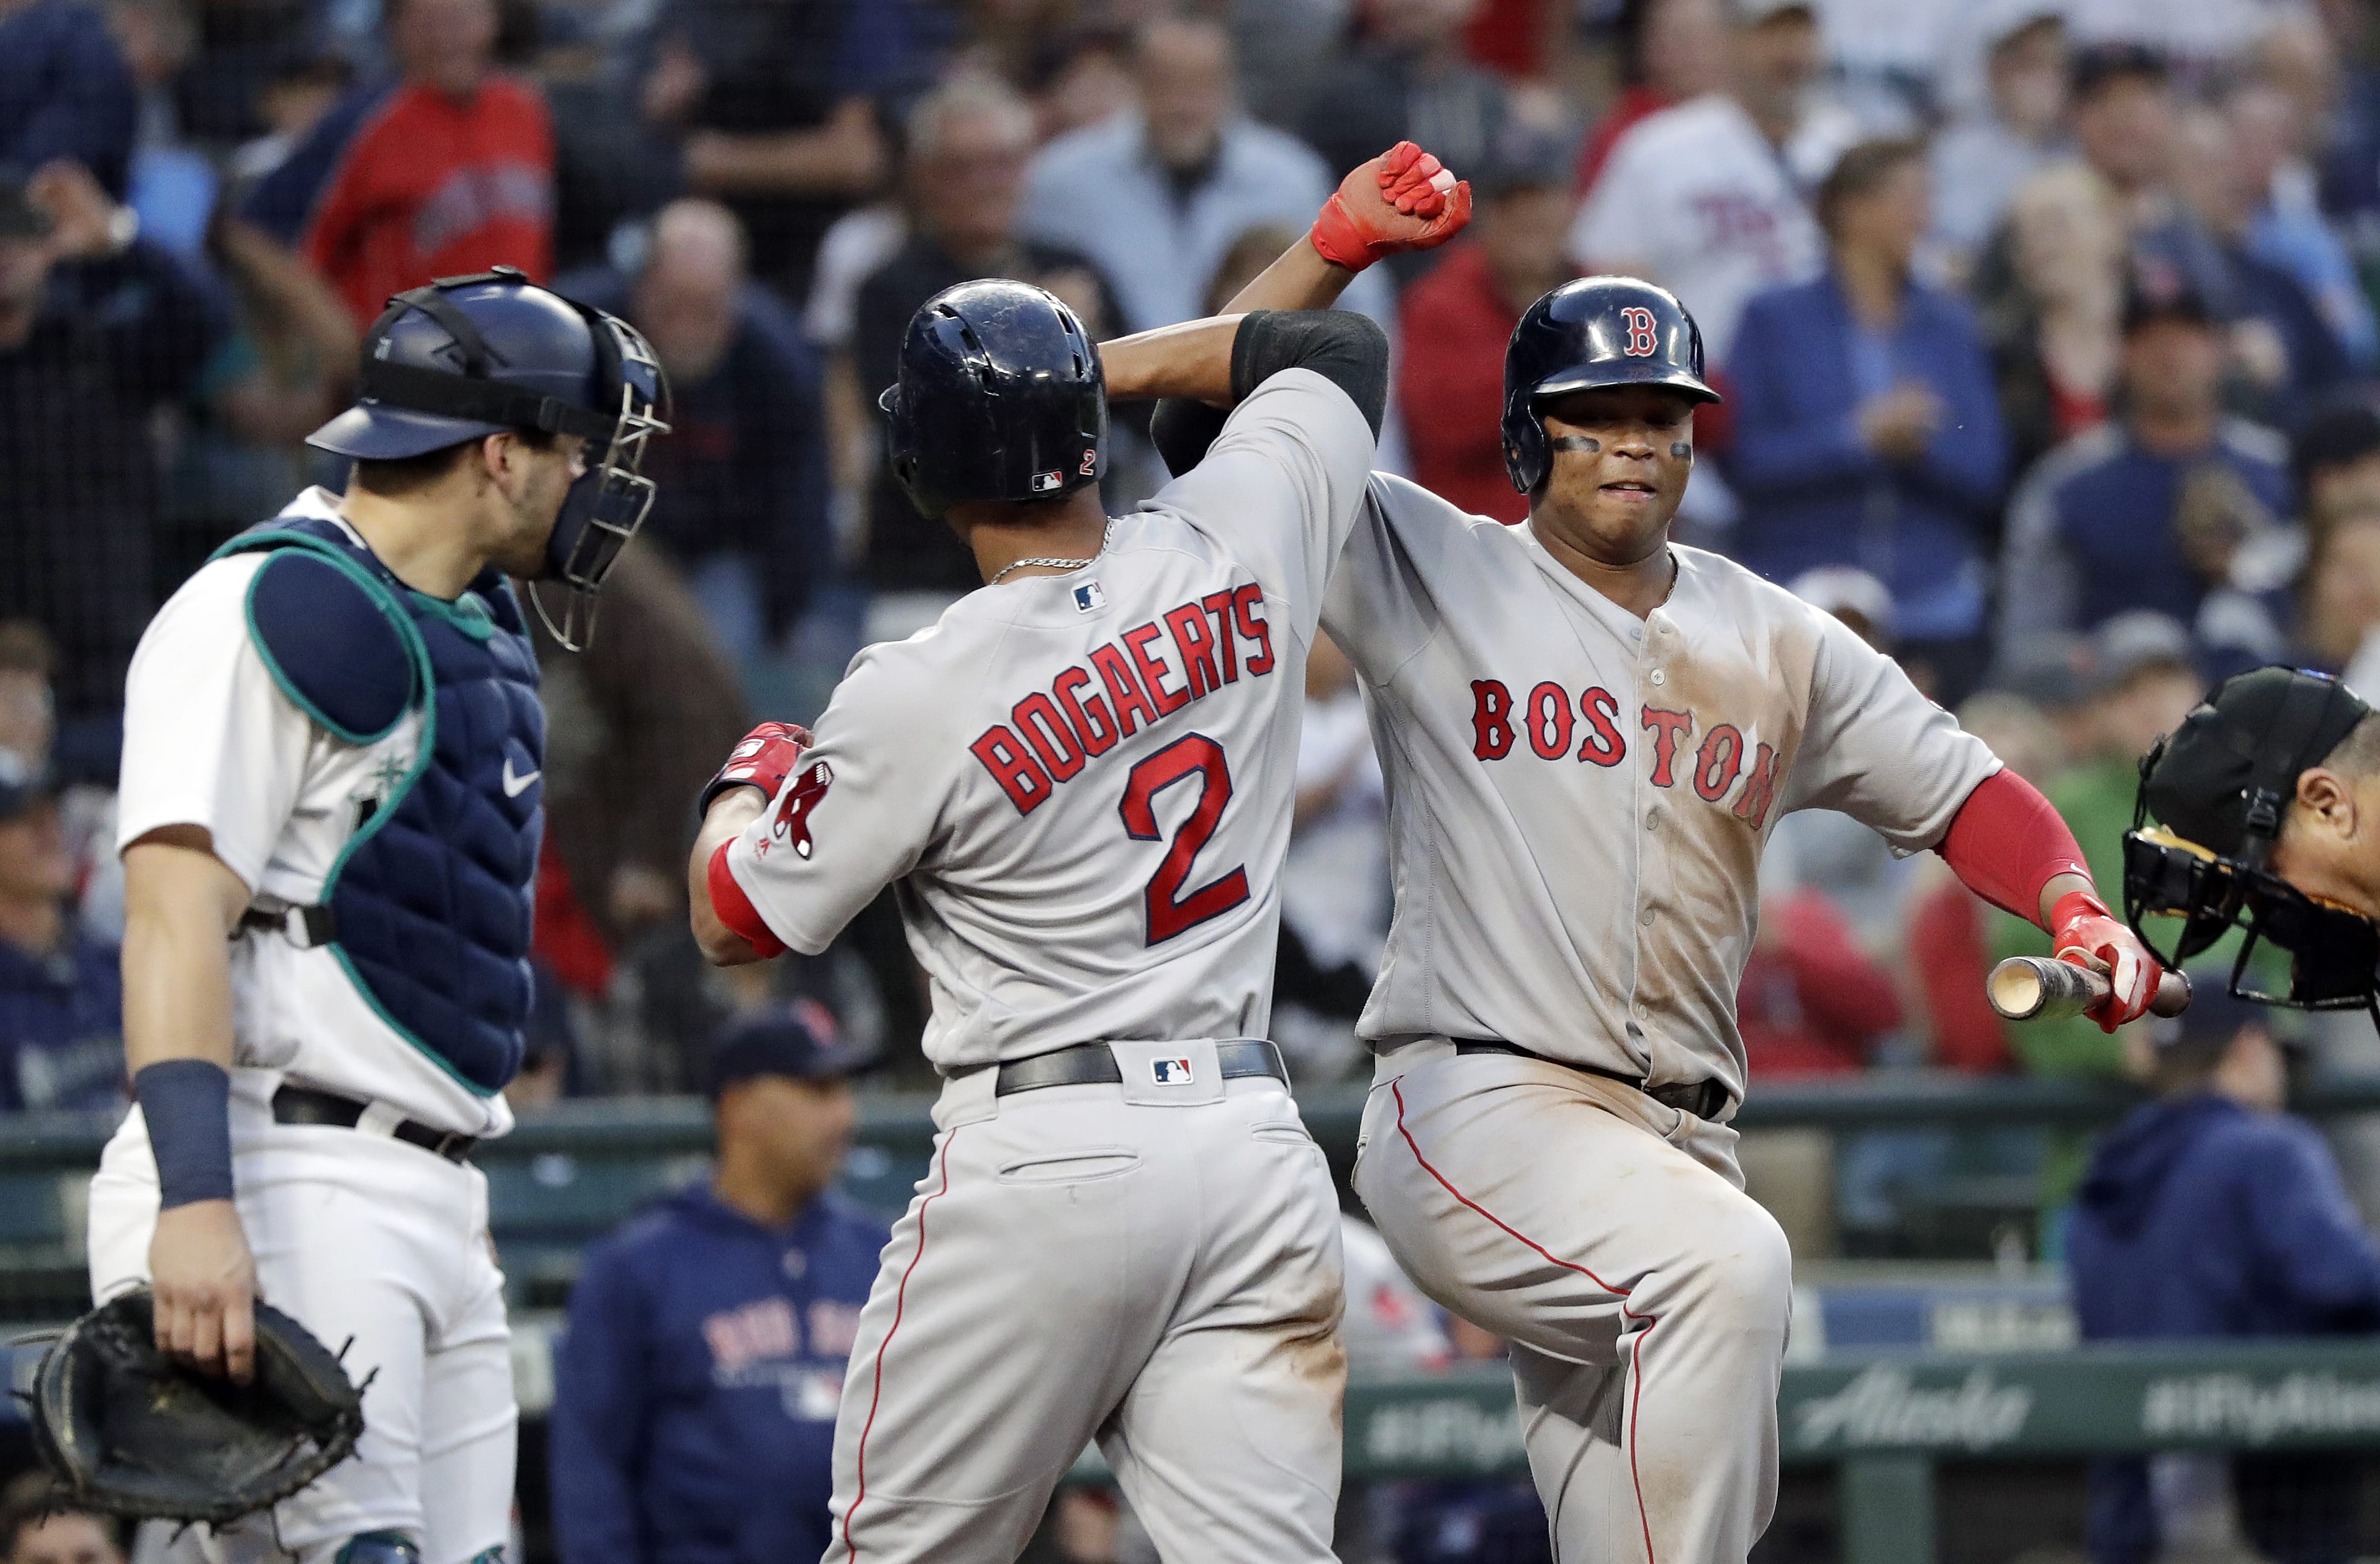 Boston Red Sox's Xander Bogaerts (2) is congratulated on his solo home run by Rafael Devers as Seattle Mariners catcher Mike Zunino stands nearby during the sixth inning of a baseball game Thursday, June 14, 2018, in Seattle.